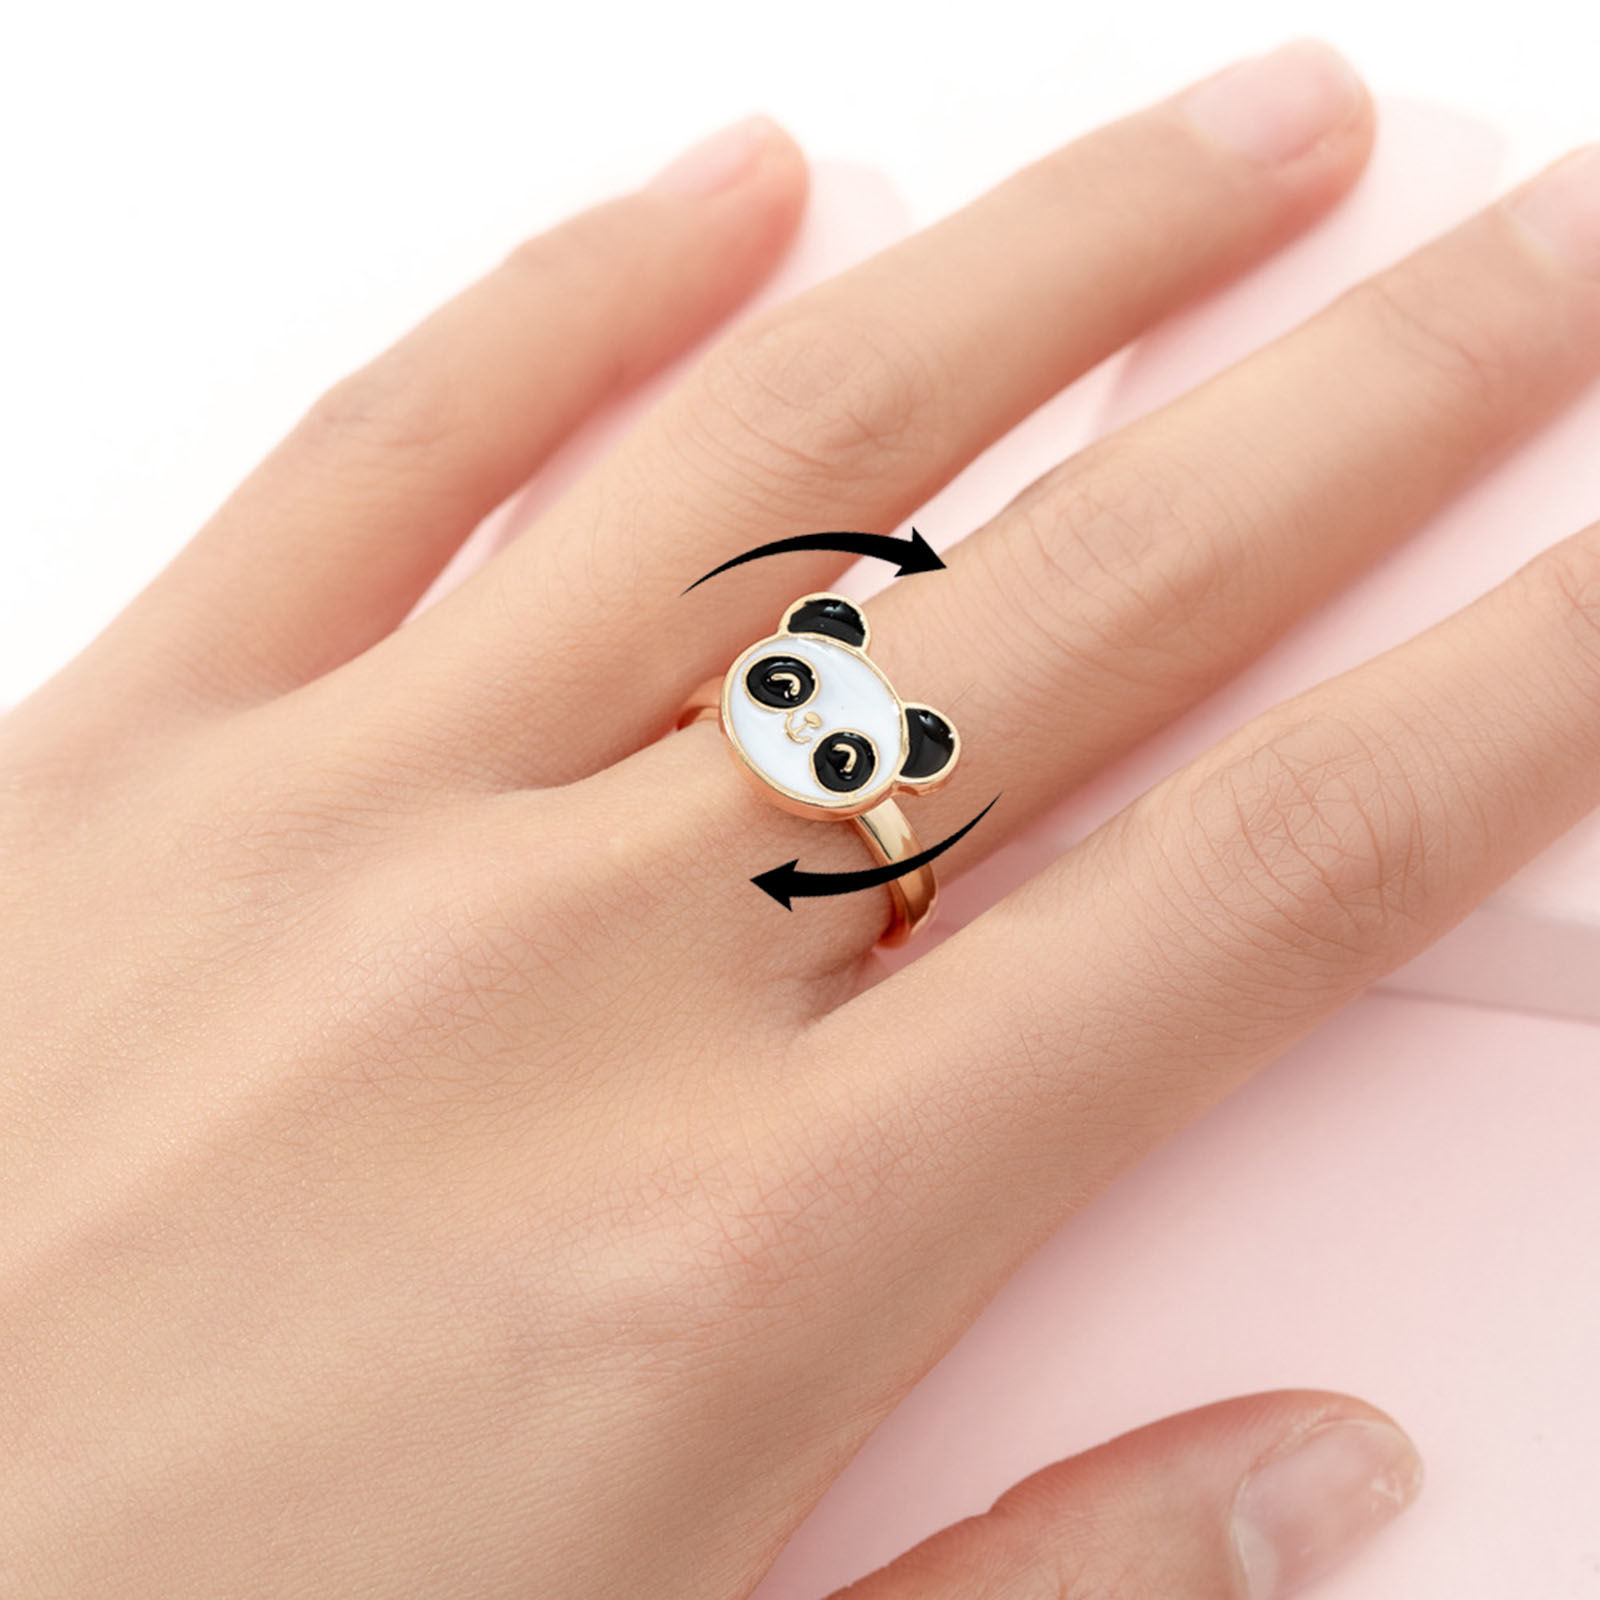 Picture of Children Kids Open Stress Relieving Anxiety Ring Fidget Spinner Rings Gold Plated Enamel White Panda Animal 2cm Dia., 1 Piece